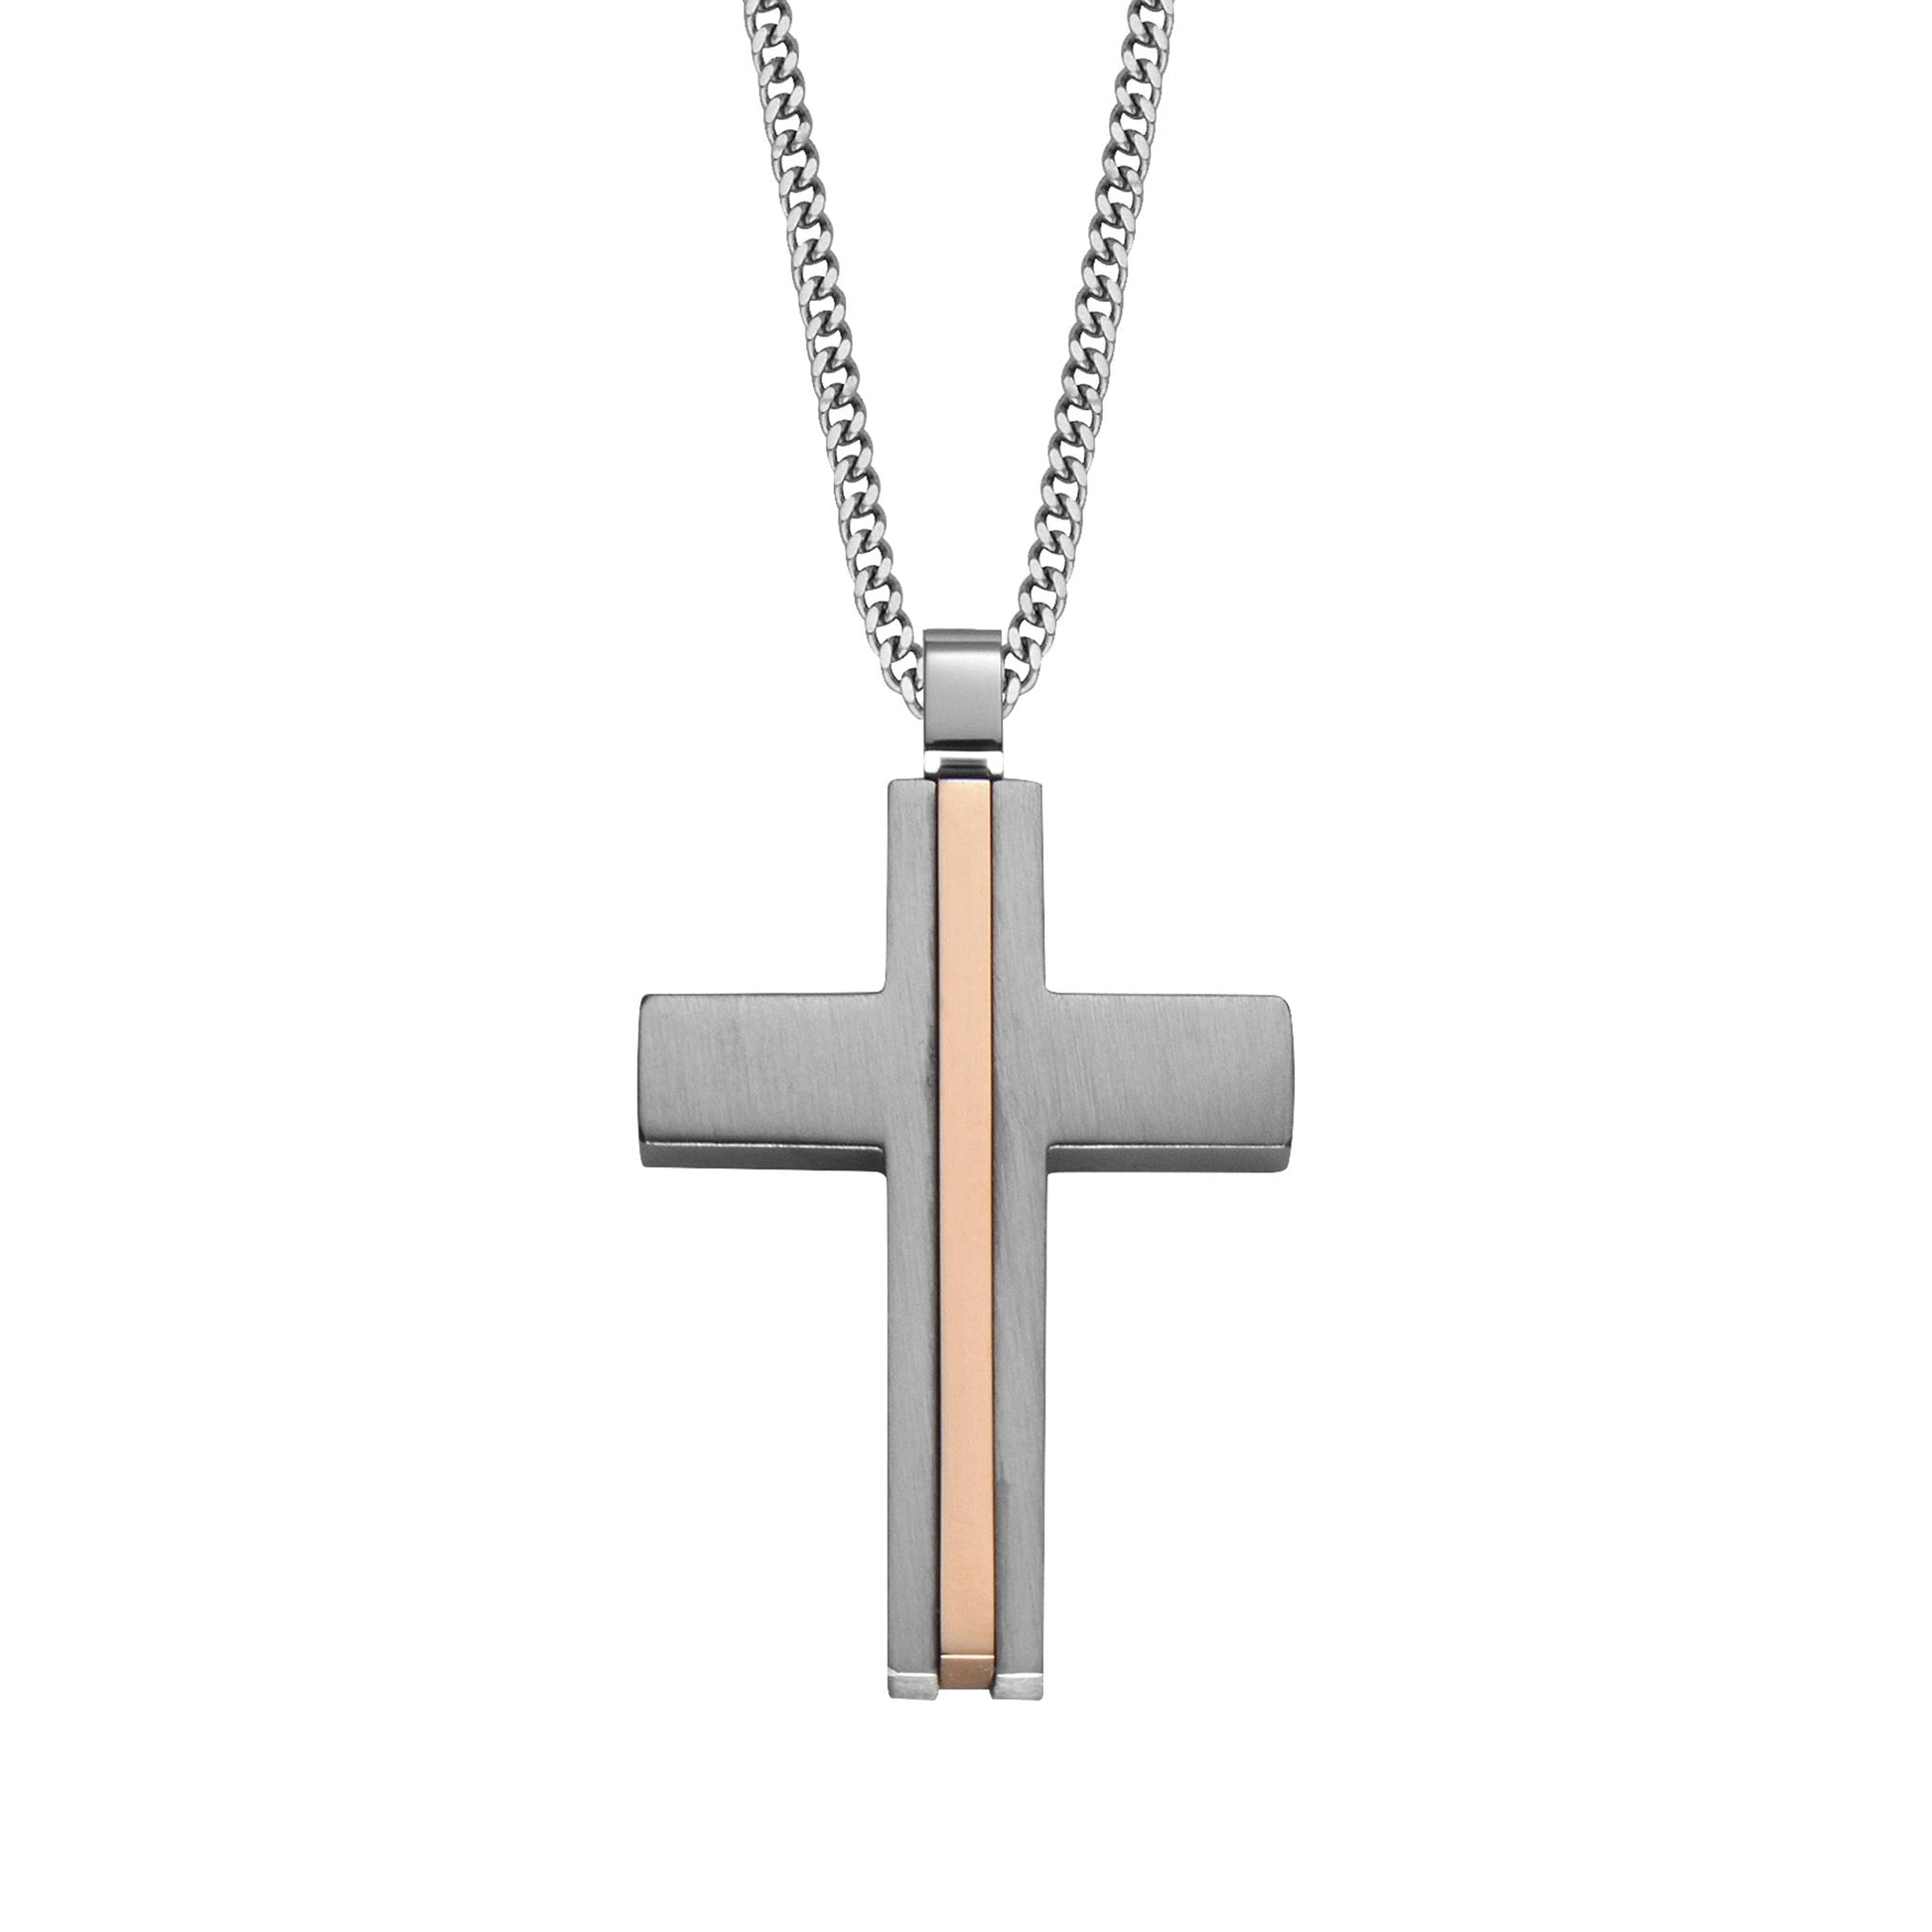 A stainless steel cross necklace with stripe accent displayed on a neutral white background.